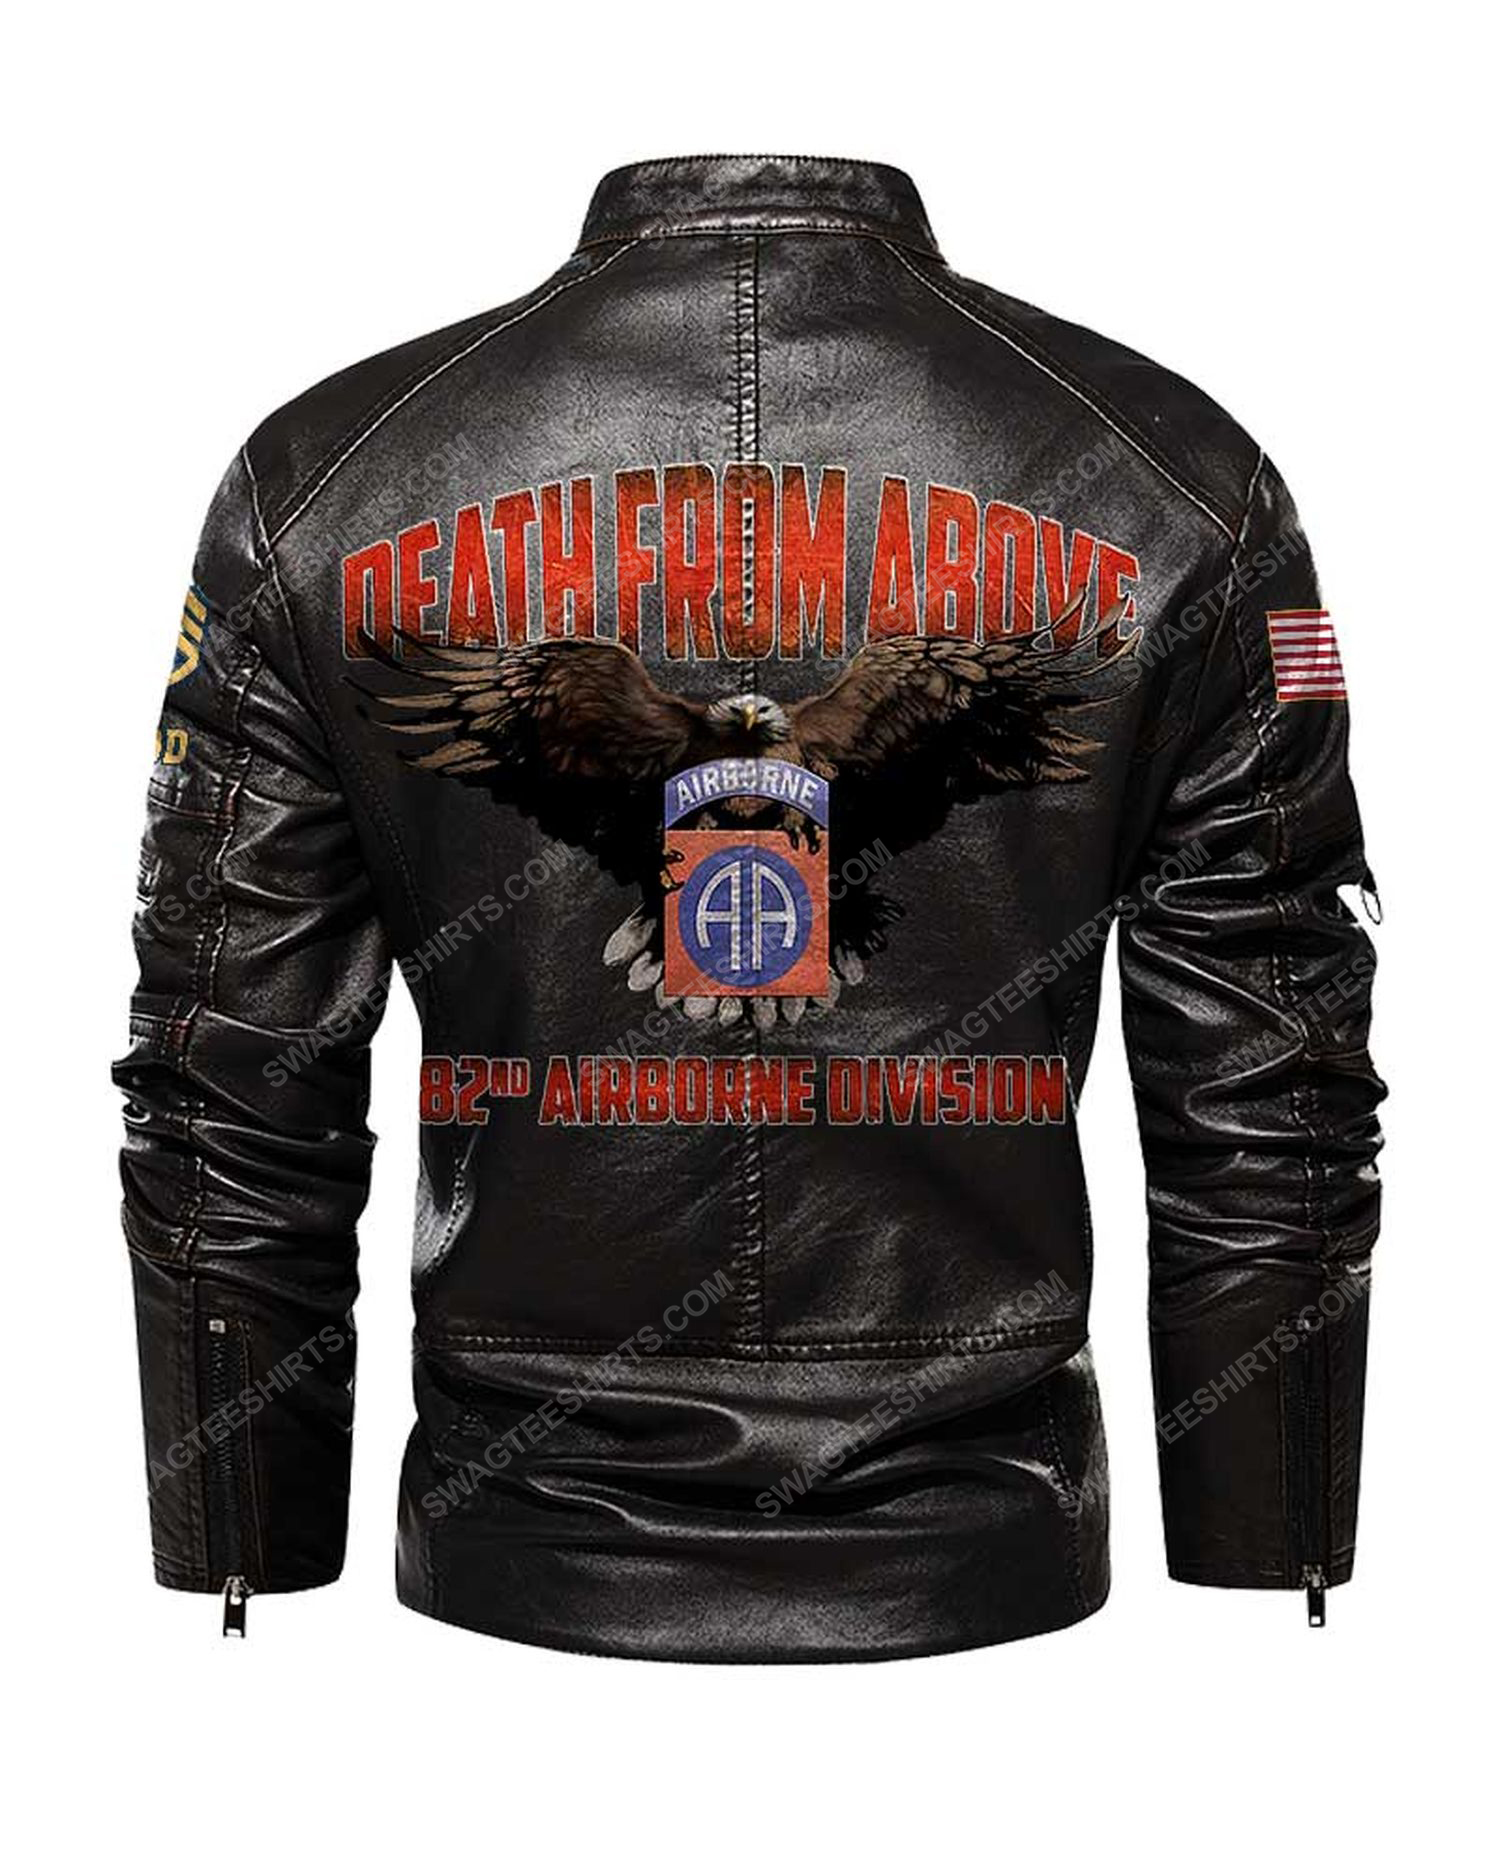 Custom eagle 82nd airborne division death from above moto leather jacket - black